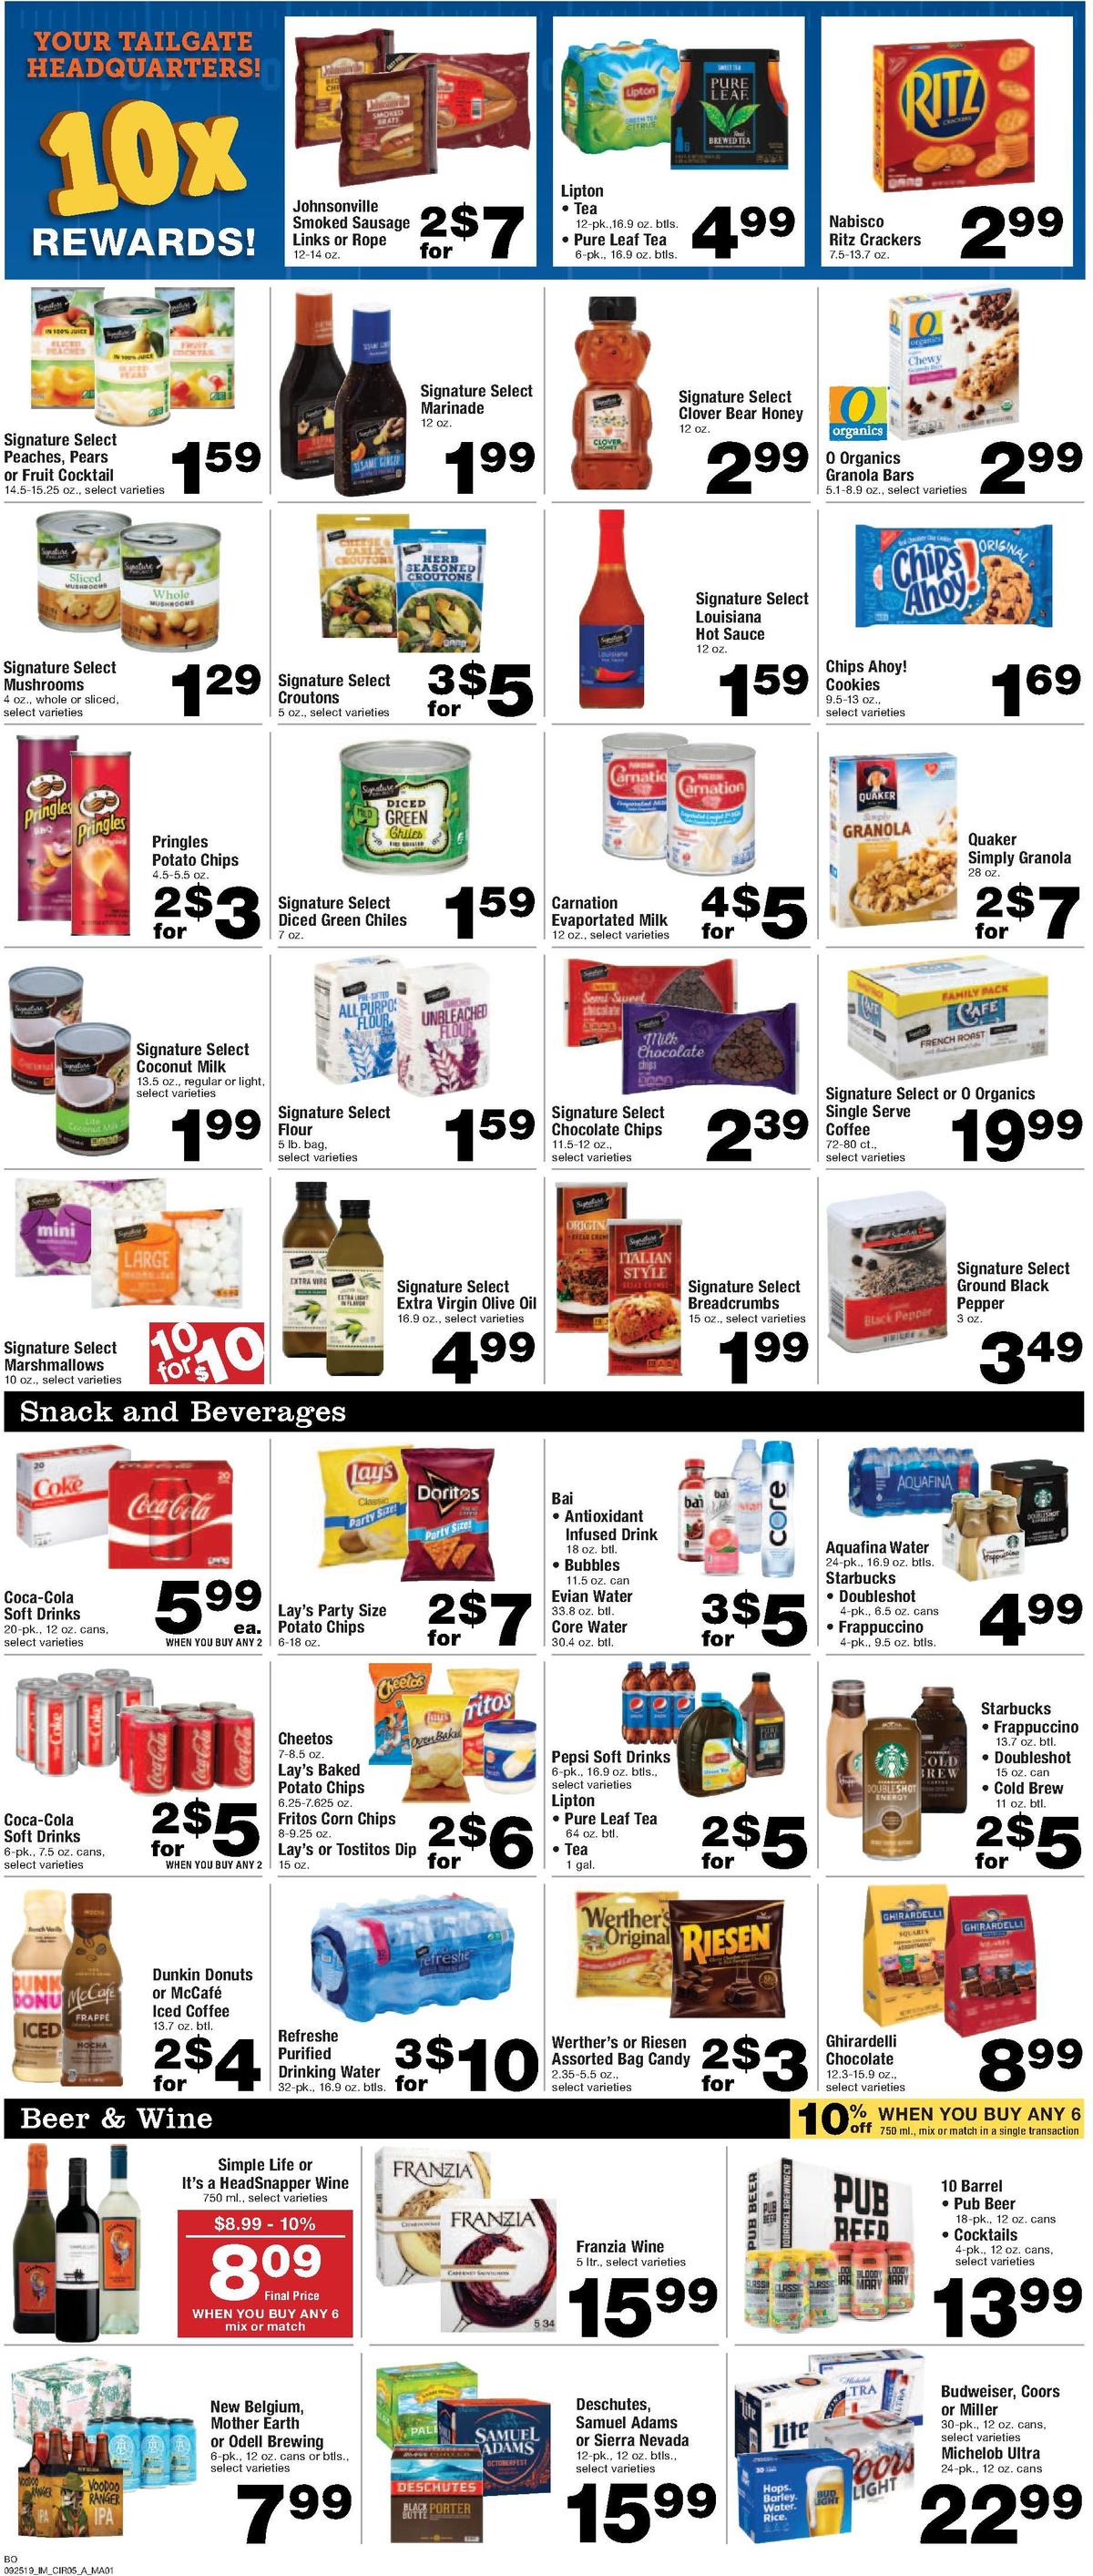 Albertsons Weekly Ad from September 25